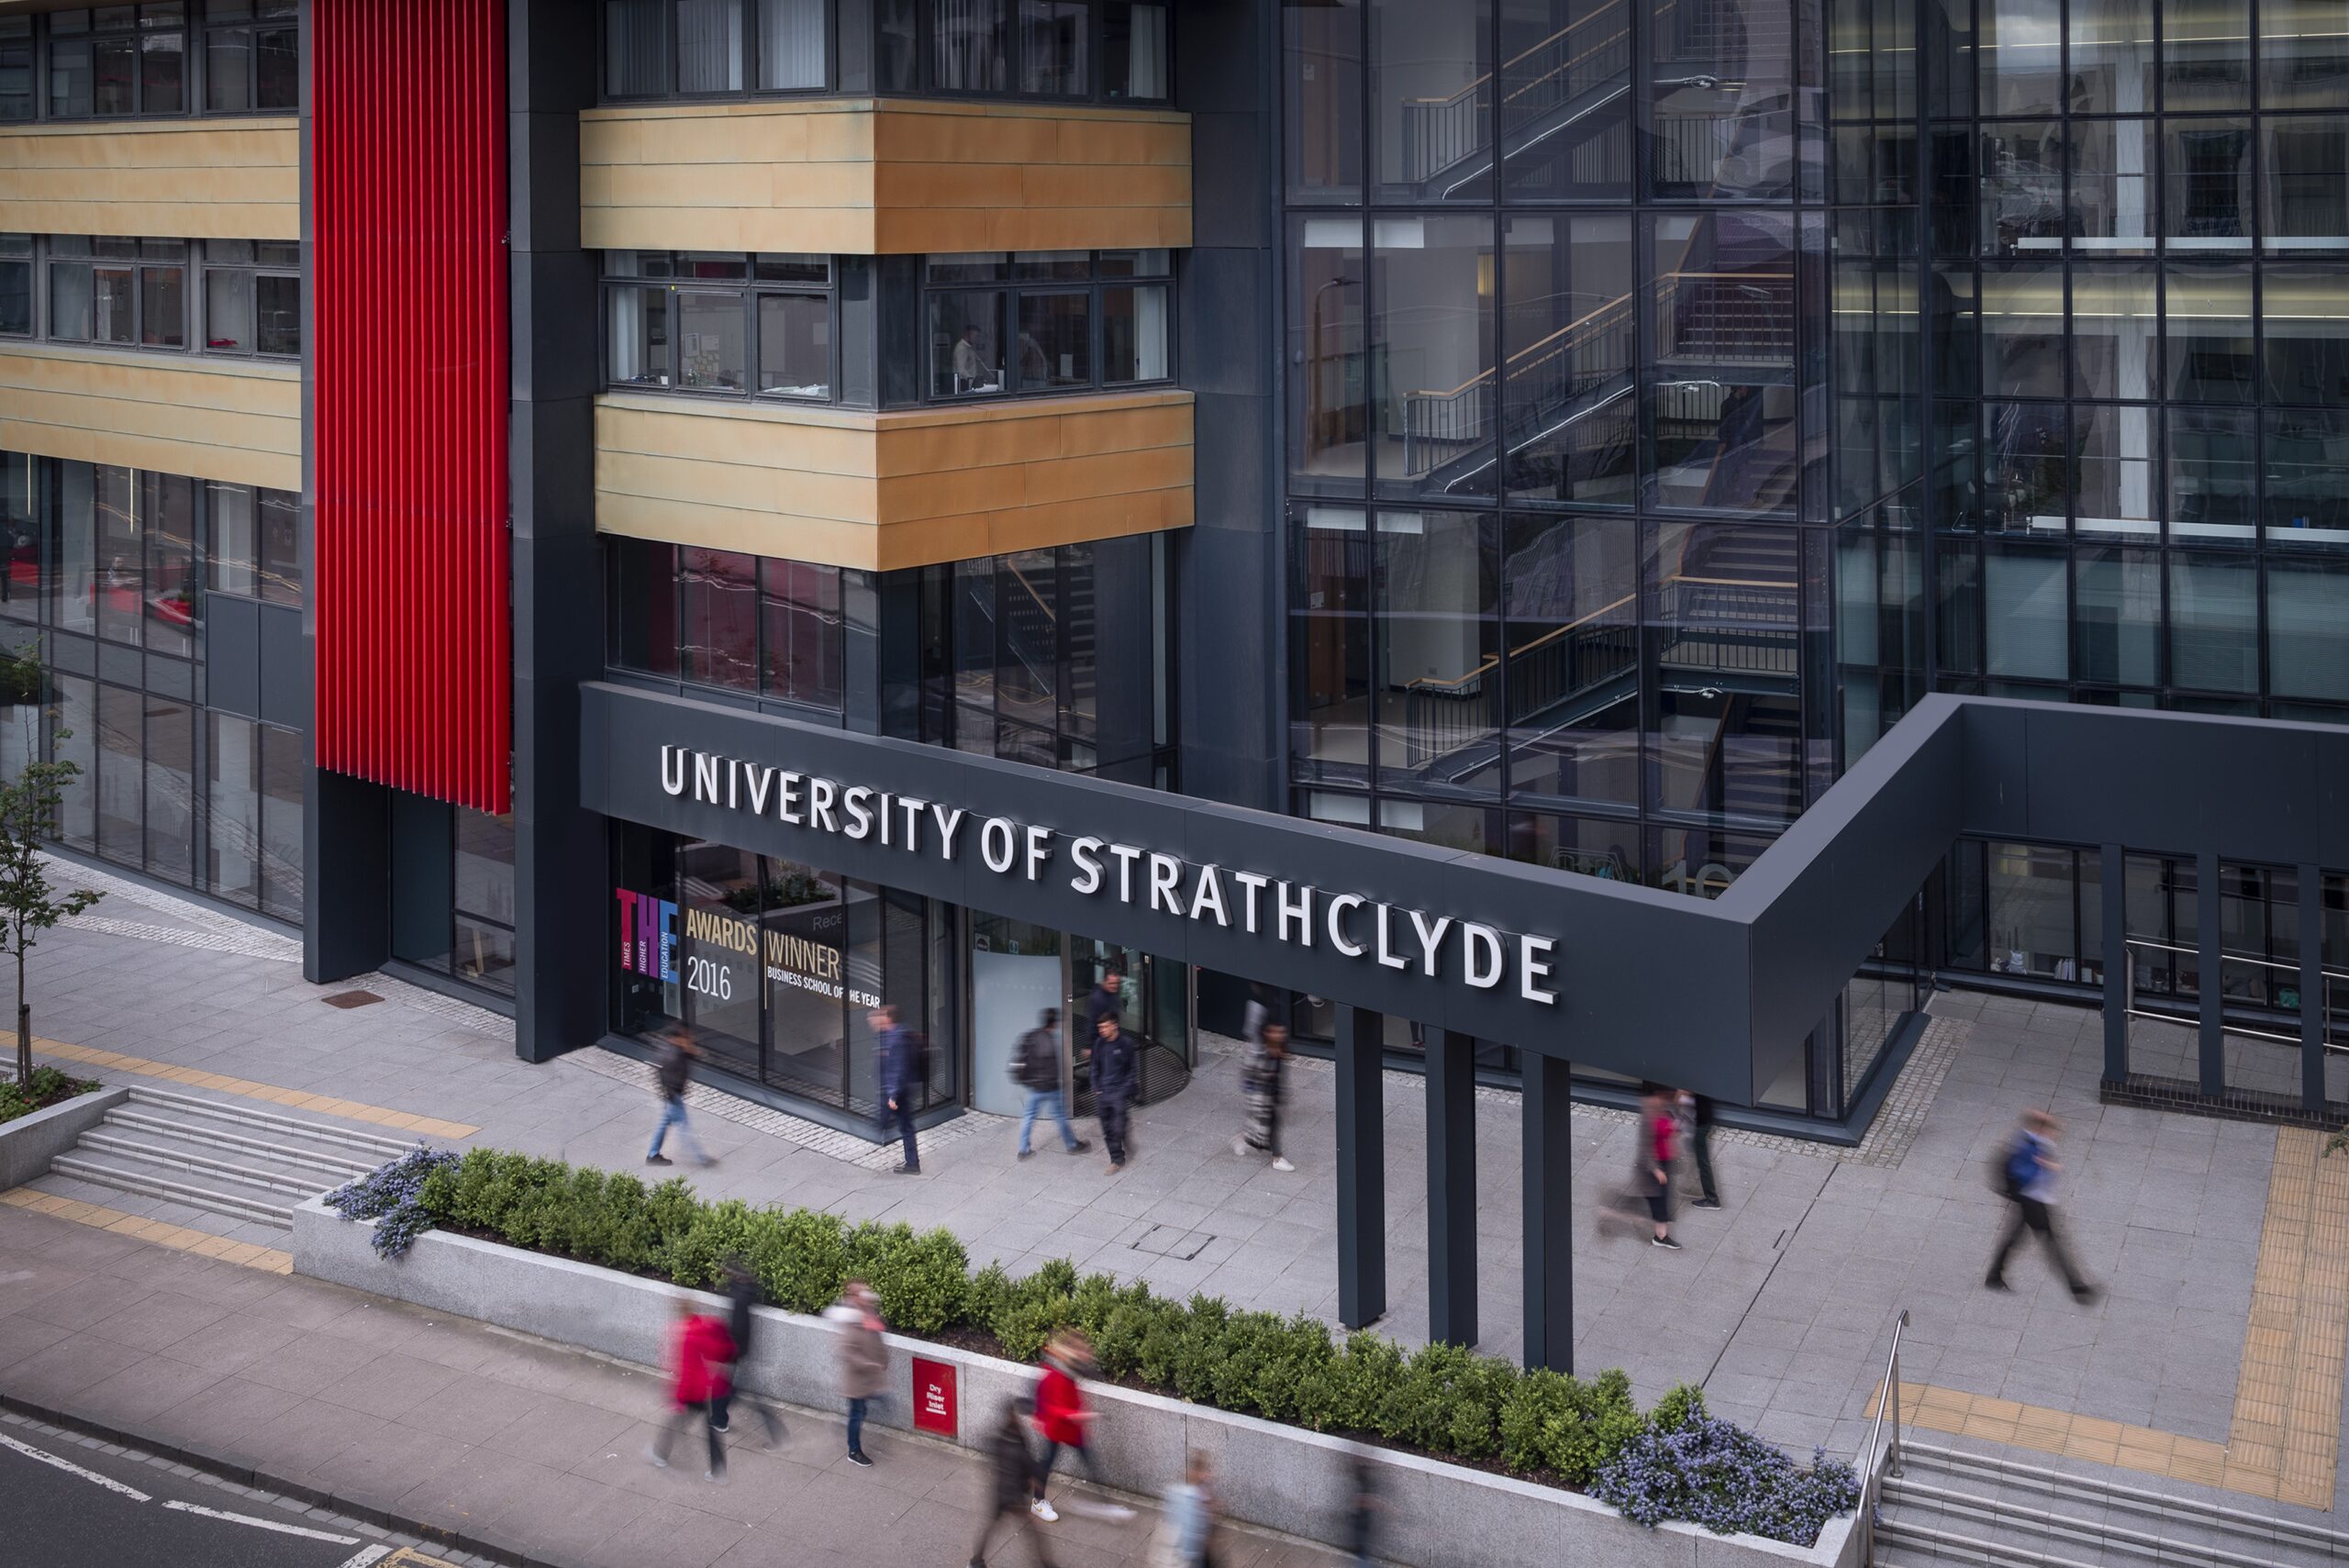 Good News for Scotland’s Space Industry as the University of Strathclyde Joins the IAF